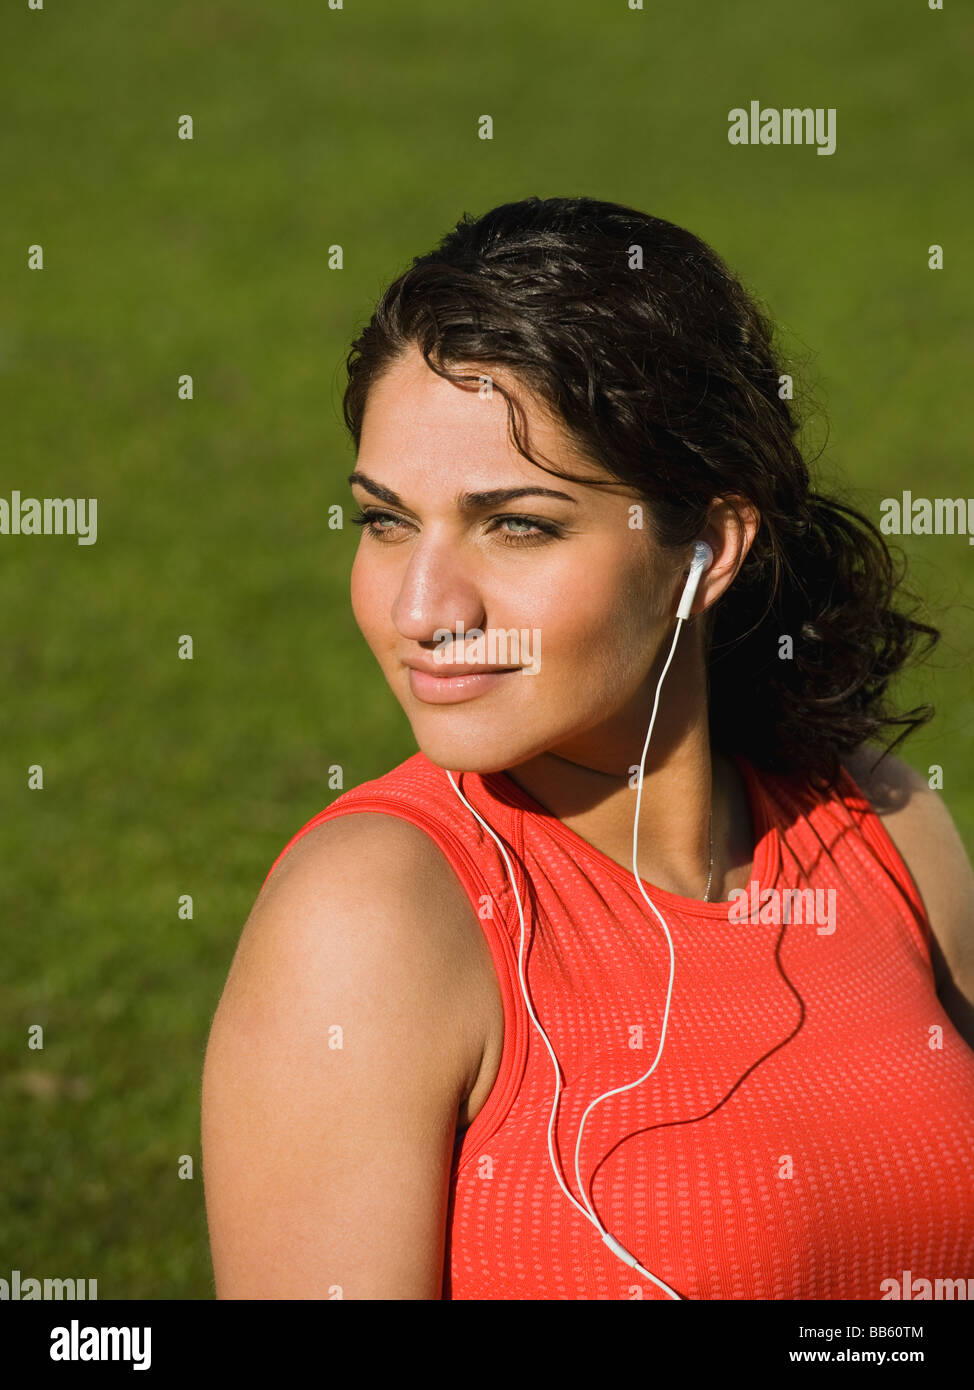 Middle Eastern woman listening to music in park Banque D'Images